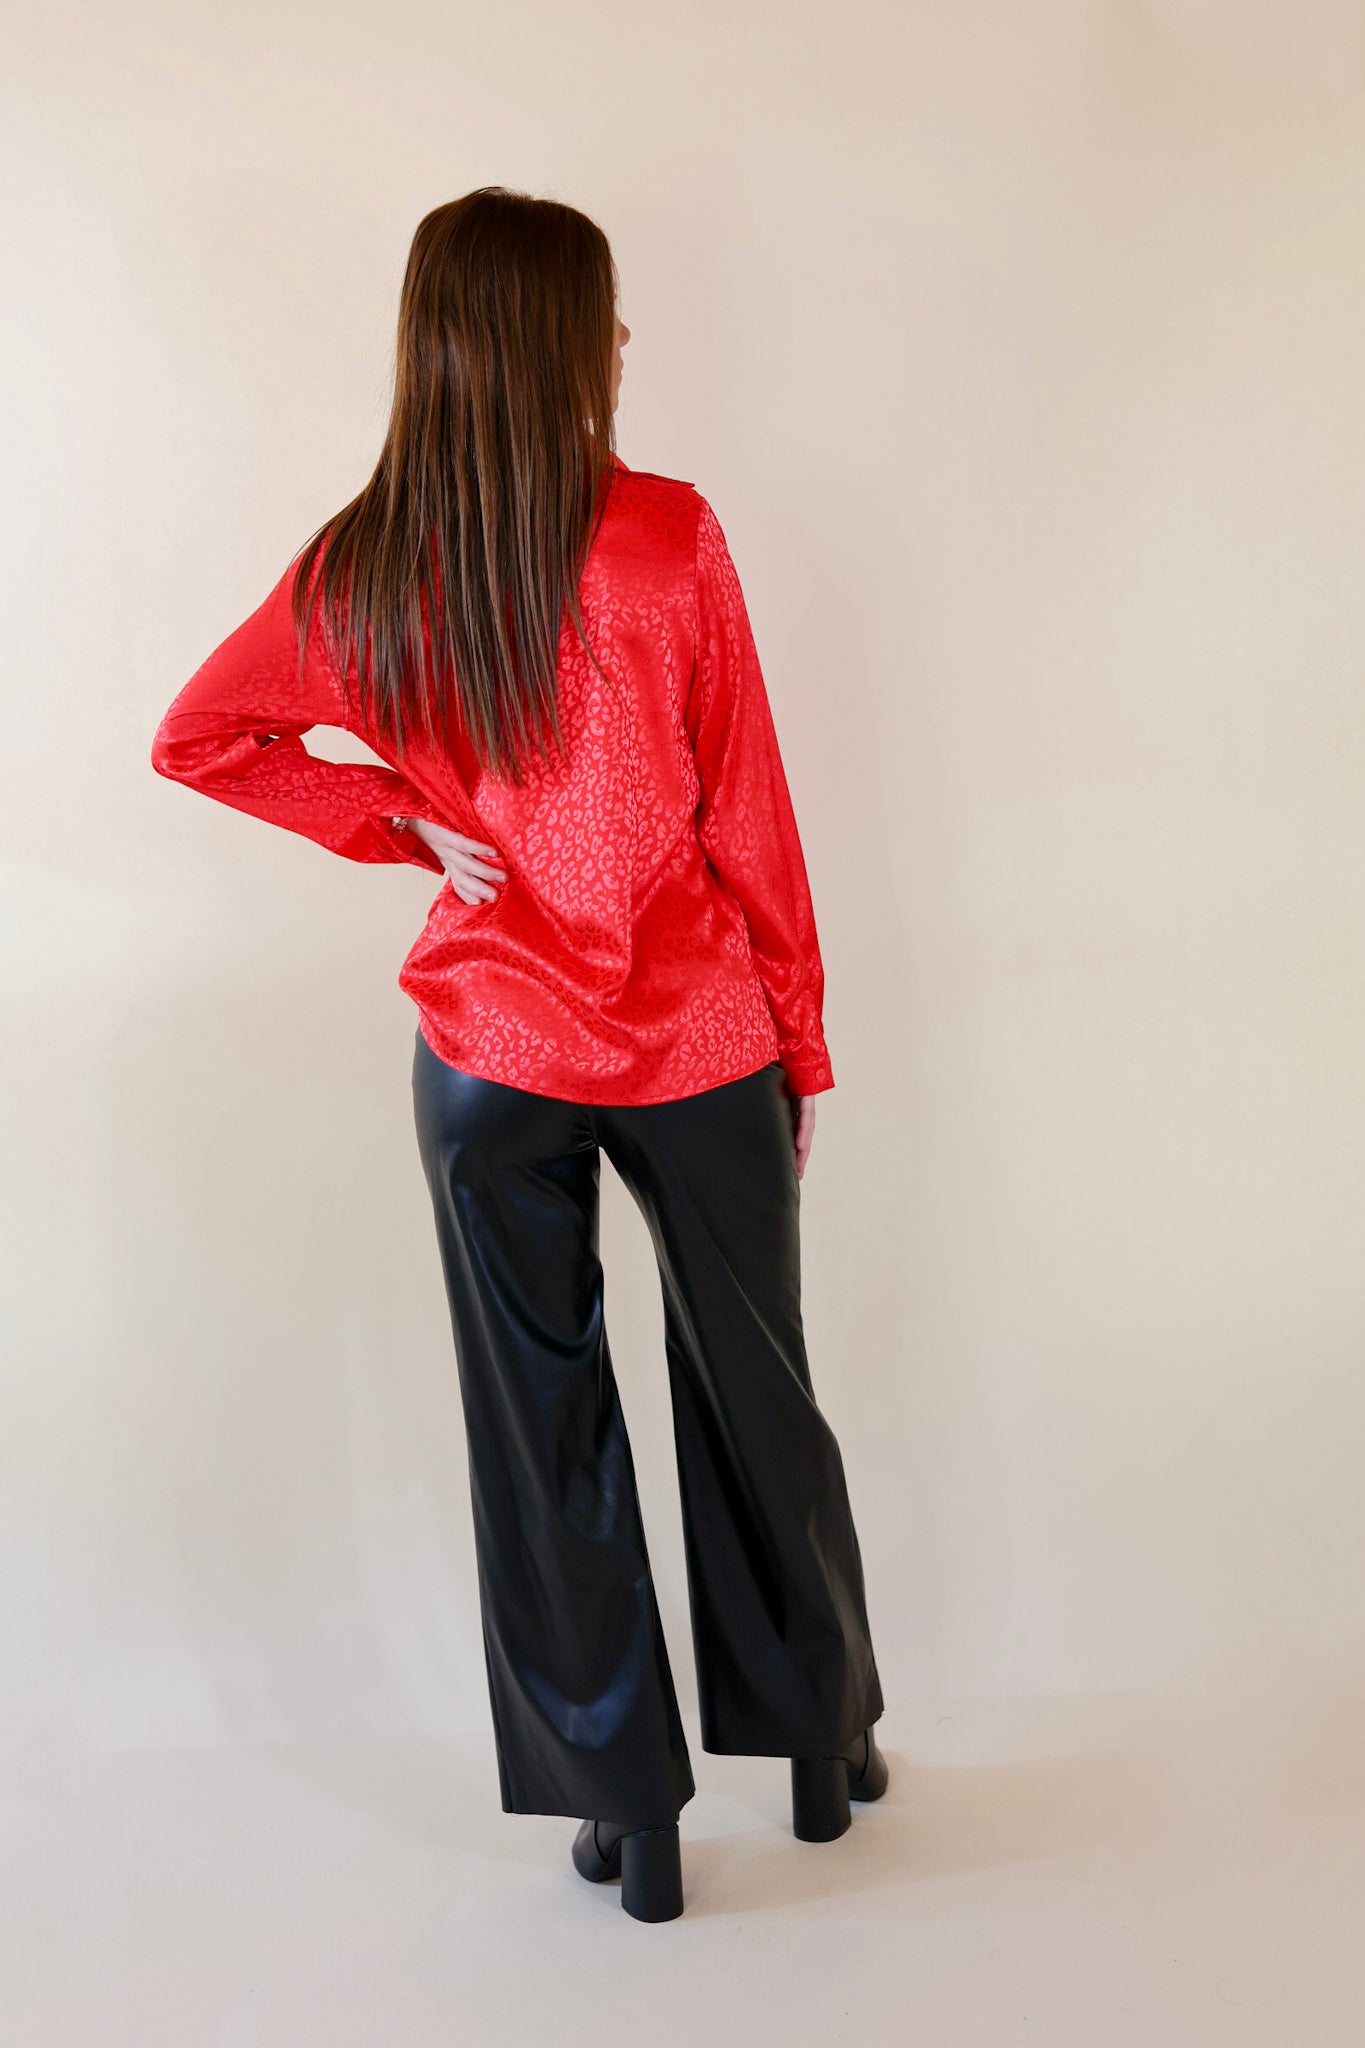 Down To Disco Leopard Print Long Sleeve Button Up Top in Lipstick Red - Giddy Up Glamour Boutique